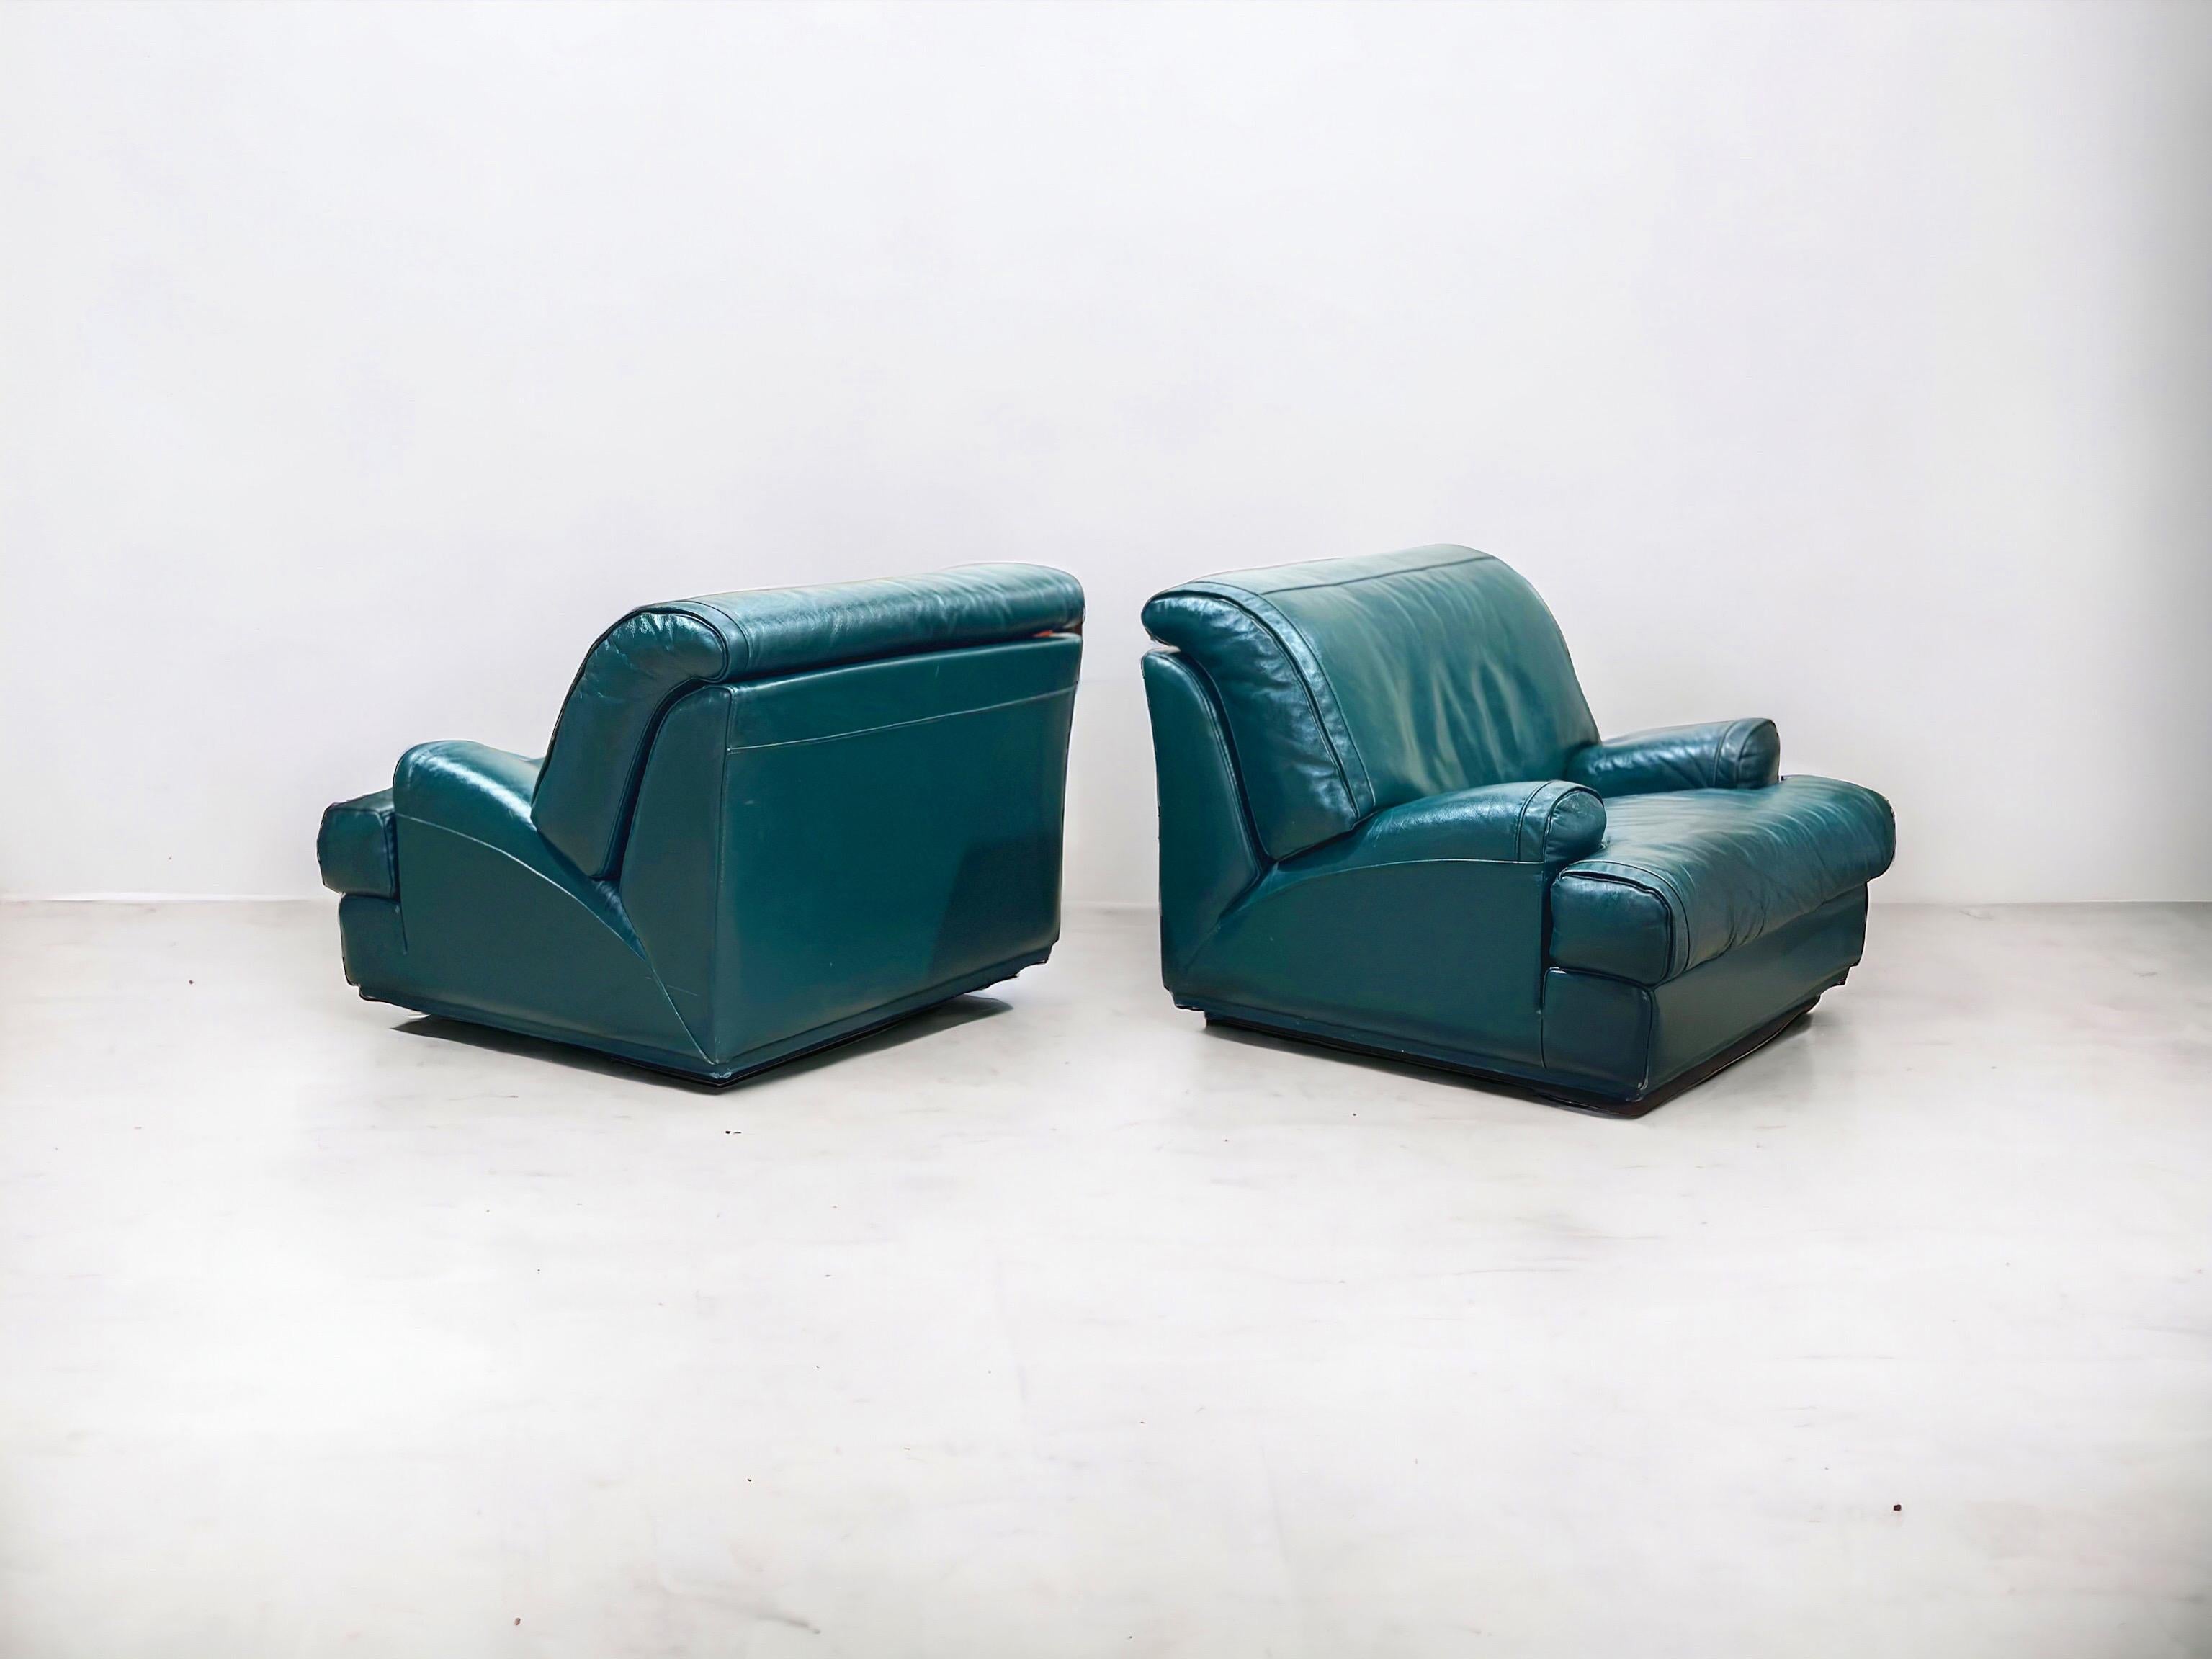 Streamlined Moderne Pair Vintage Roche Bobois Teal Leather Club Lounge Chairs - Streamline Moderne